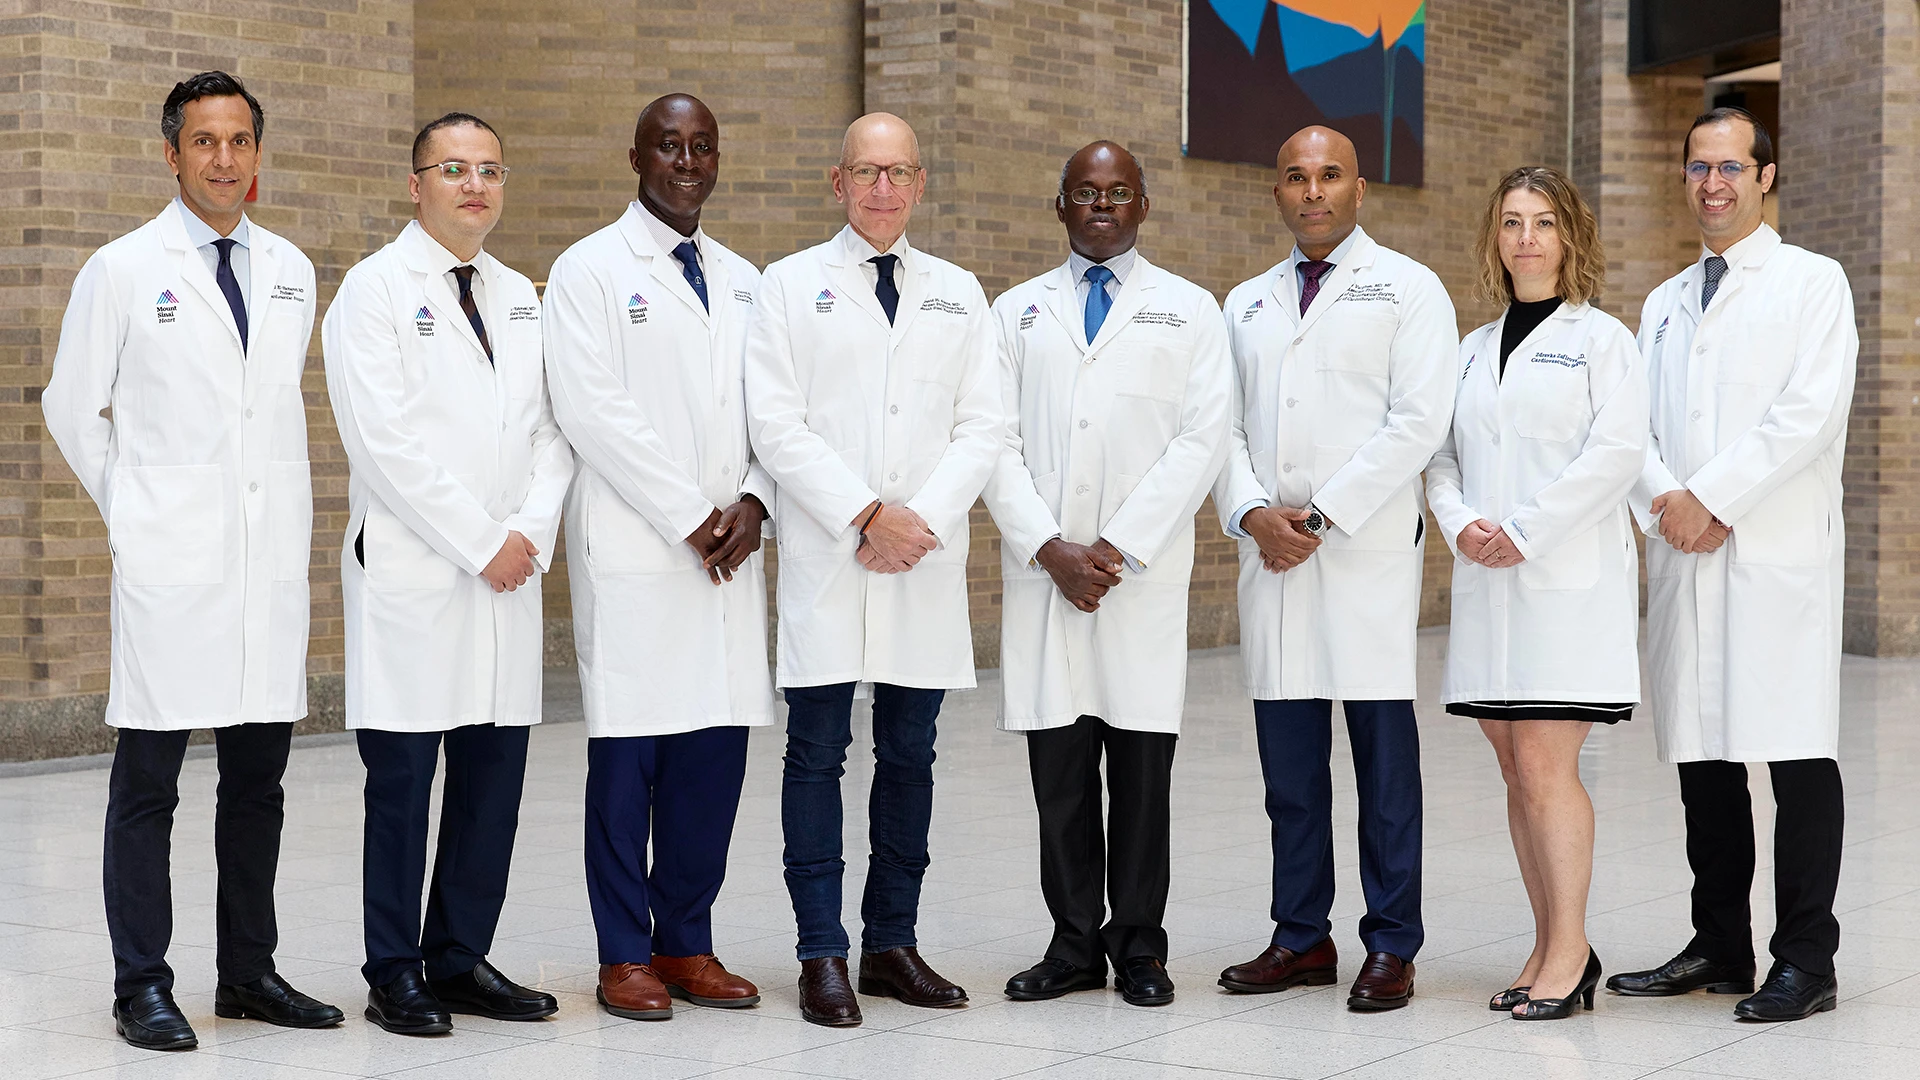 From left: Ismail El-Hamamsy, MD, PhD, Director, Aortic Surgery; Ahmed El-Eshmawi, MD, Clinical Director, and Percy Boateng, MD, National Director, Mitral Valve Repair Center; David H. Adams, MD, Chair of Cardiovascular Surgery; Anelechi Anyanwu, MD, Surgical Director, Heart Transplantation; Robin Varghese, MD, MS, Director, Cardiovascular Critical Care; Zdravka Zafirova, MD, Director, Cardiovascular Intensive Care; and Menachem Weiner, MD, Director, Cardiothoracic Anesthesia.